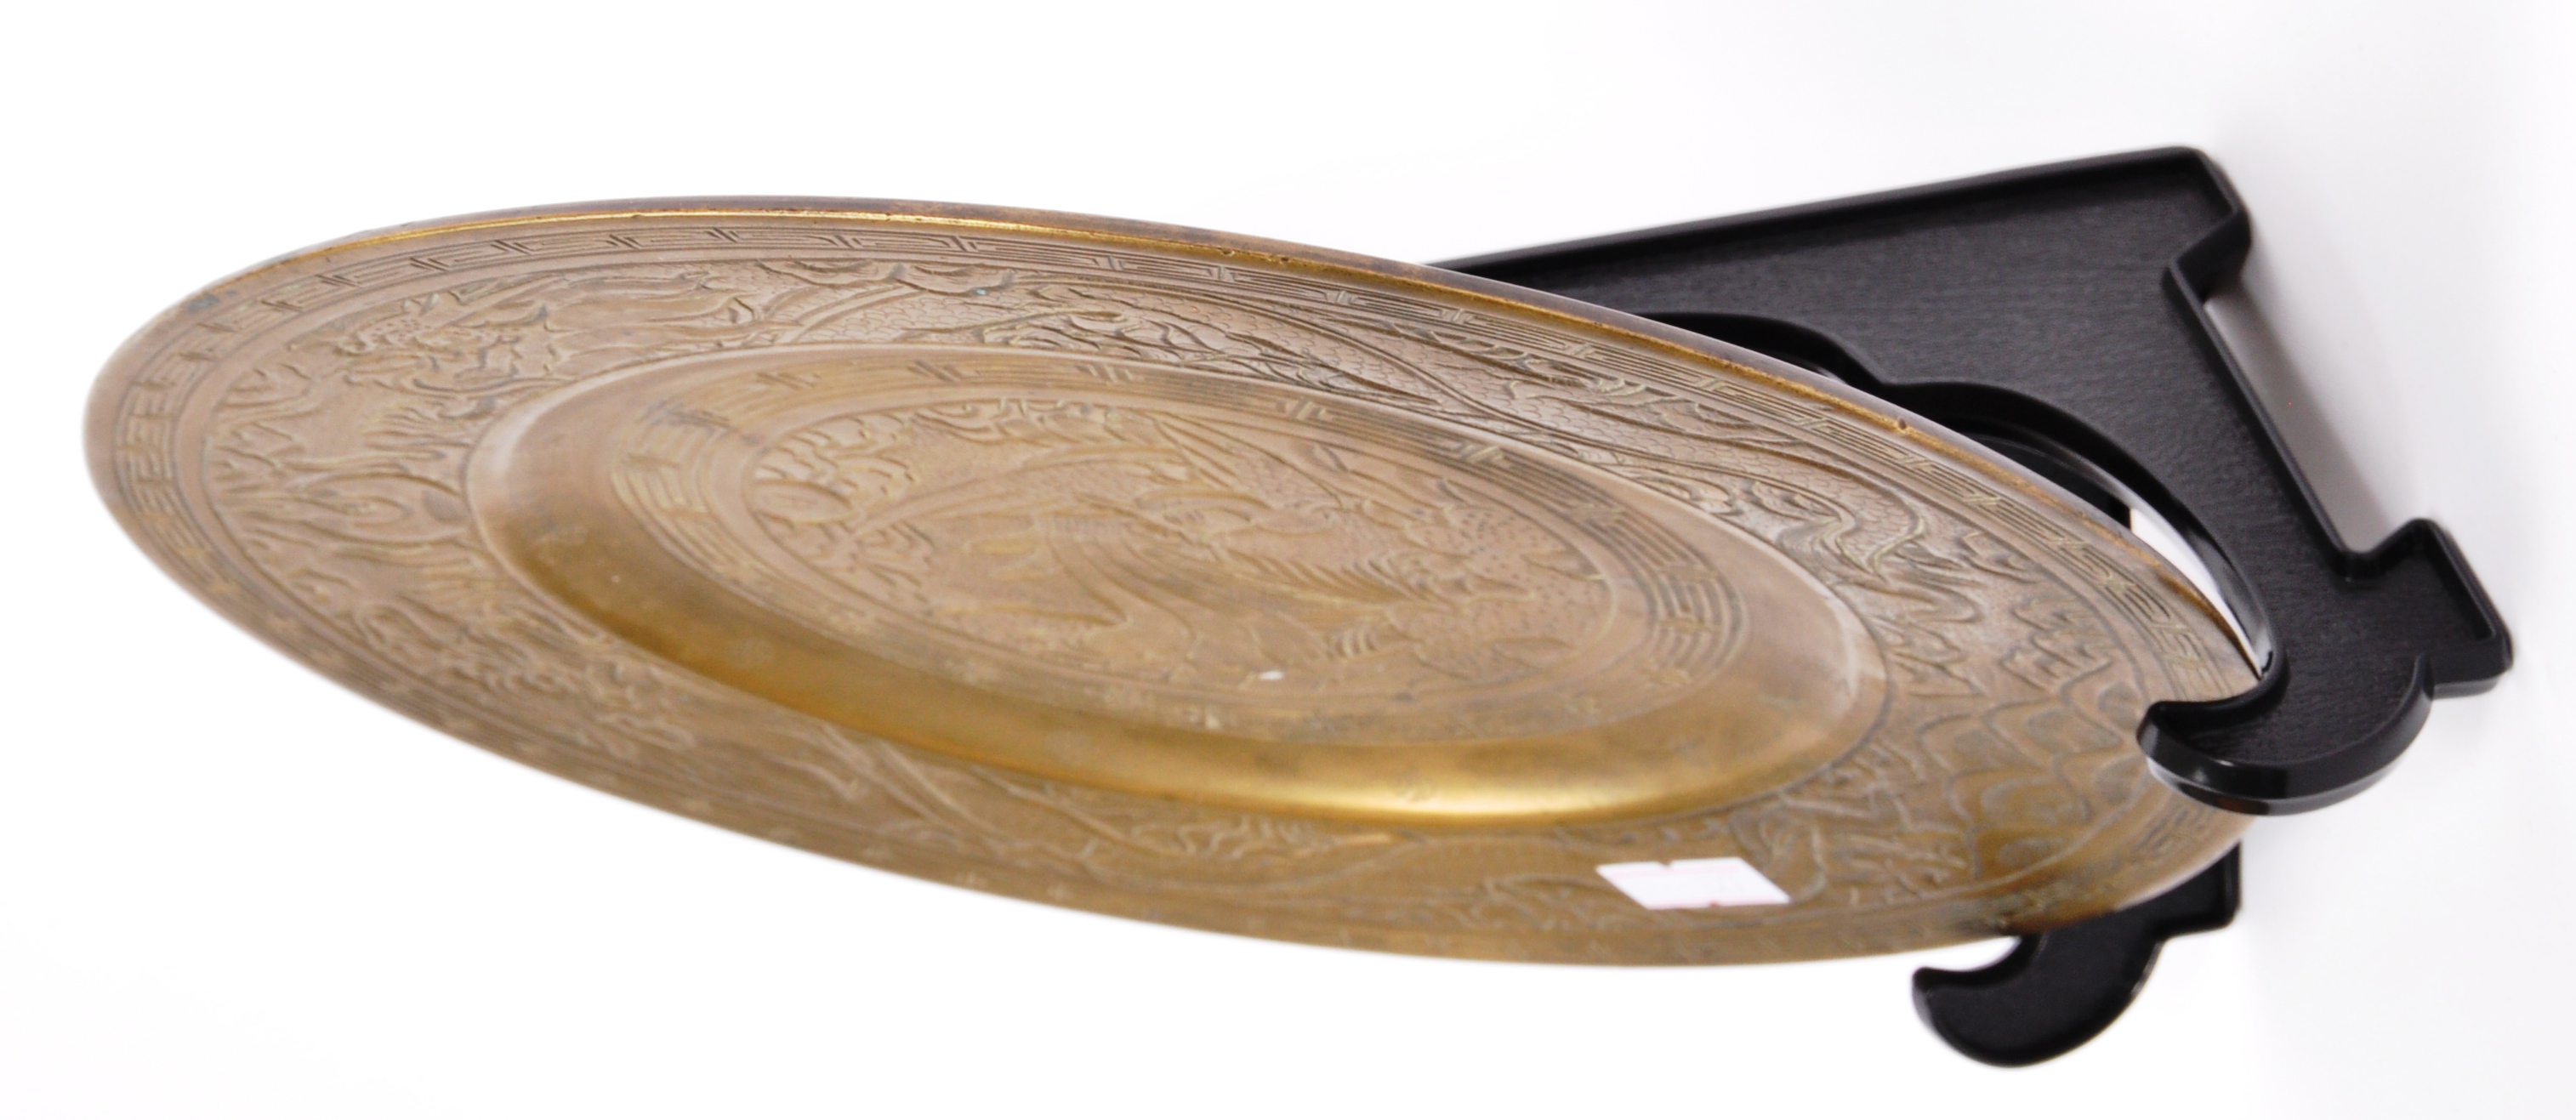 19TH CENTURY CHINESE ORIENTAL ENGRAVED BRONZE PLATE DISH - Image 4 of 5